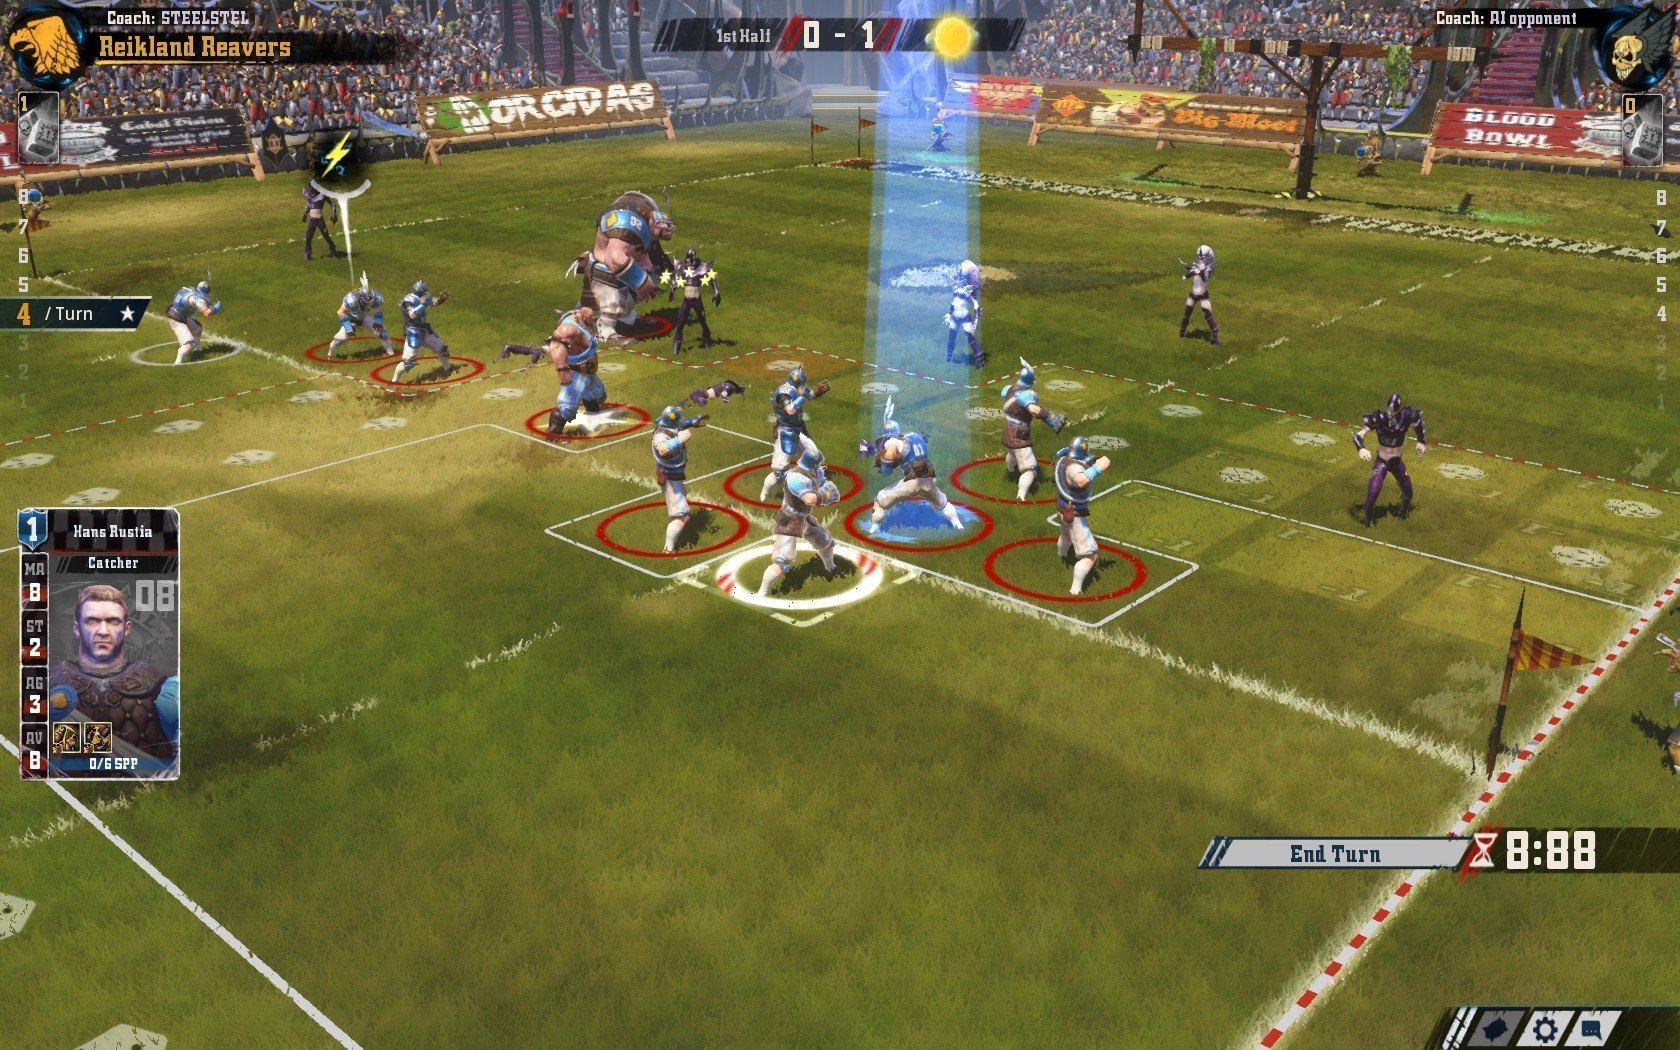 Blood Bowl 2 Review (Computer) - Official GBAtemp Review | GBAtemp.net -  The Independent Video Game Community